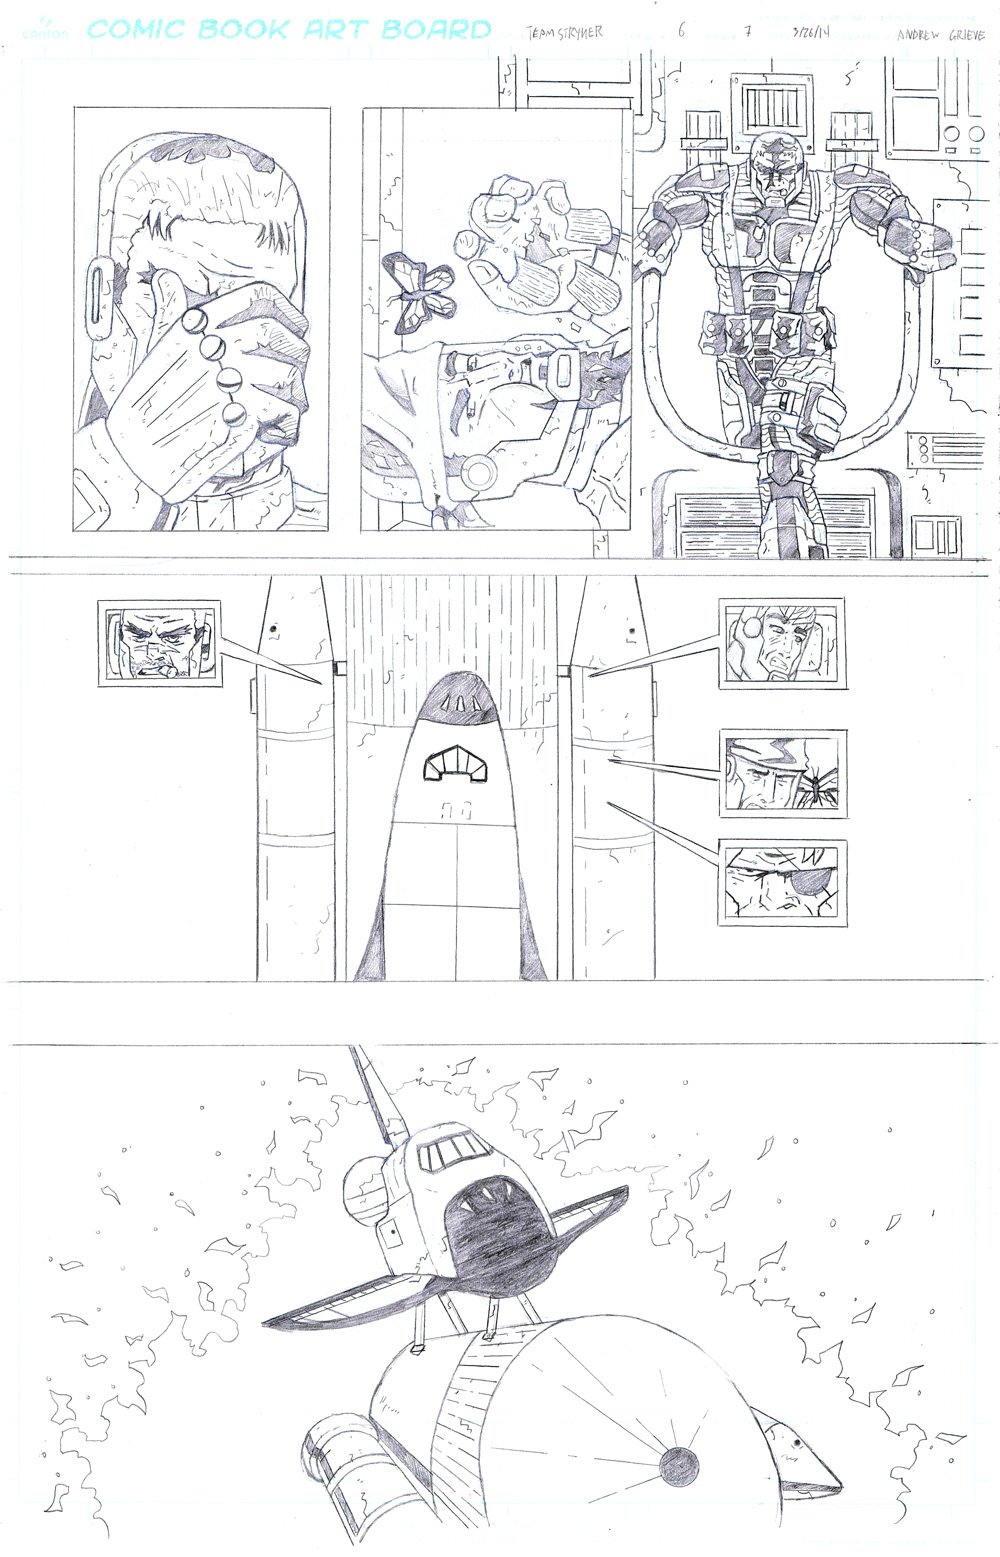 MISSION 006: PAGE 07 PENCIL